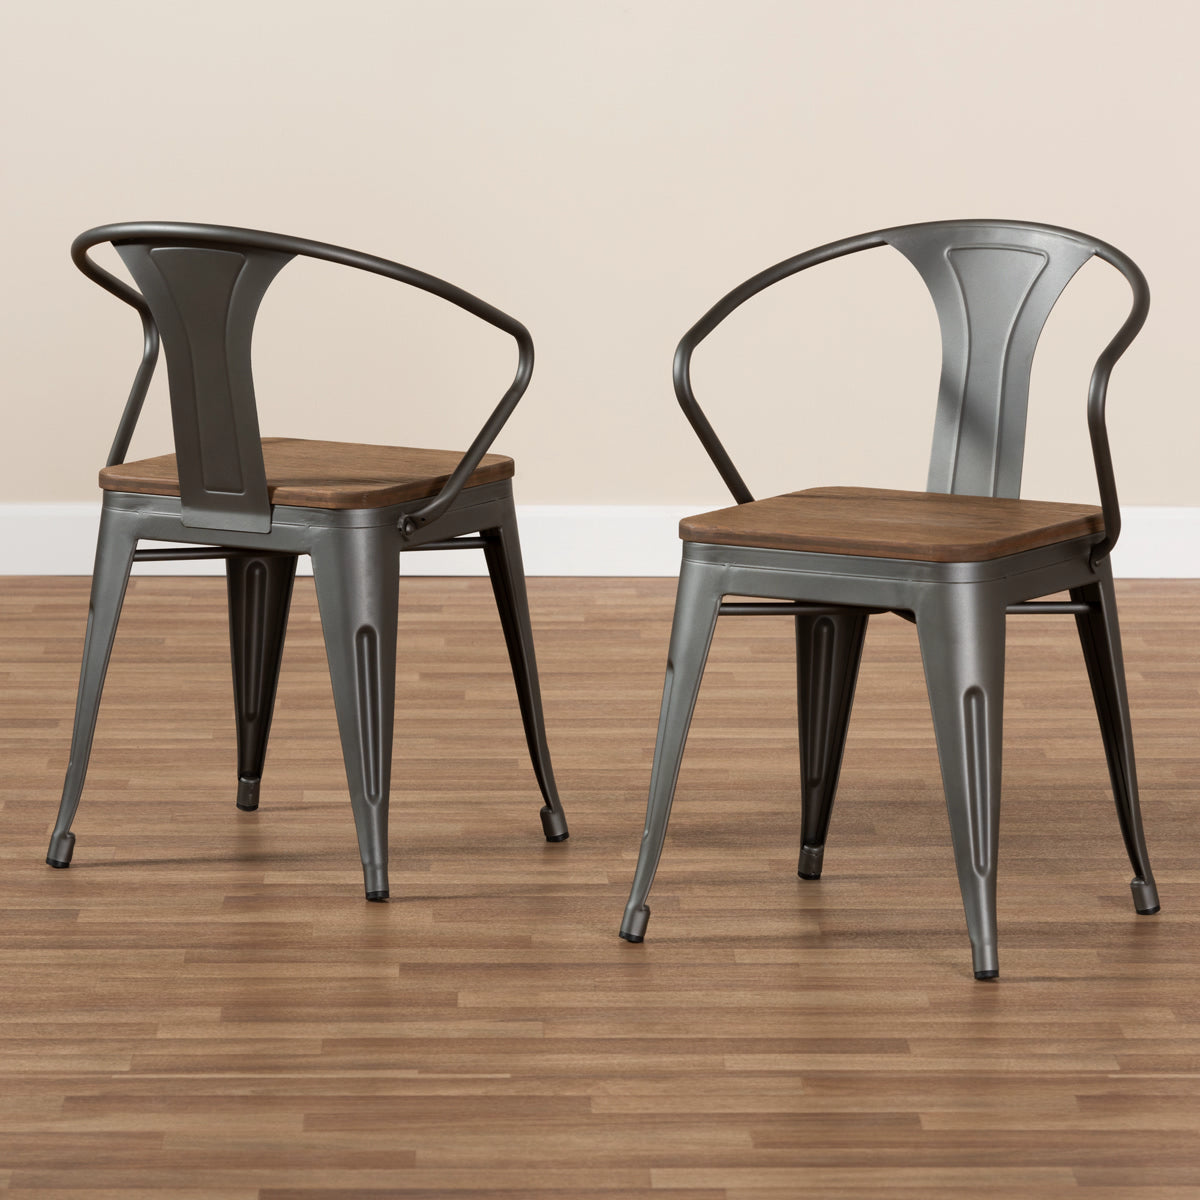 Baxton Studio Henri Vintage Rustic Industrial Style Tolix-Inspired Bamboo and Steel Stackable Side Chair Set of 2 Baxton Studio-dining chair-Minimal And Modern - 7